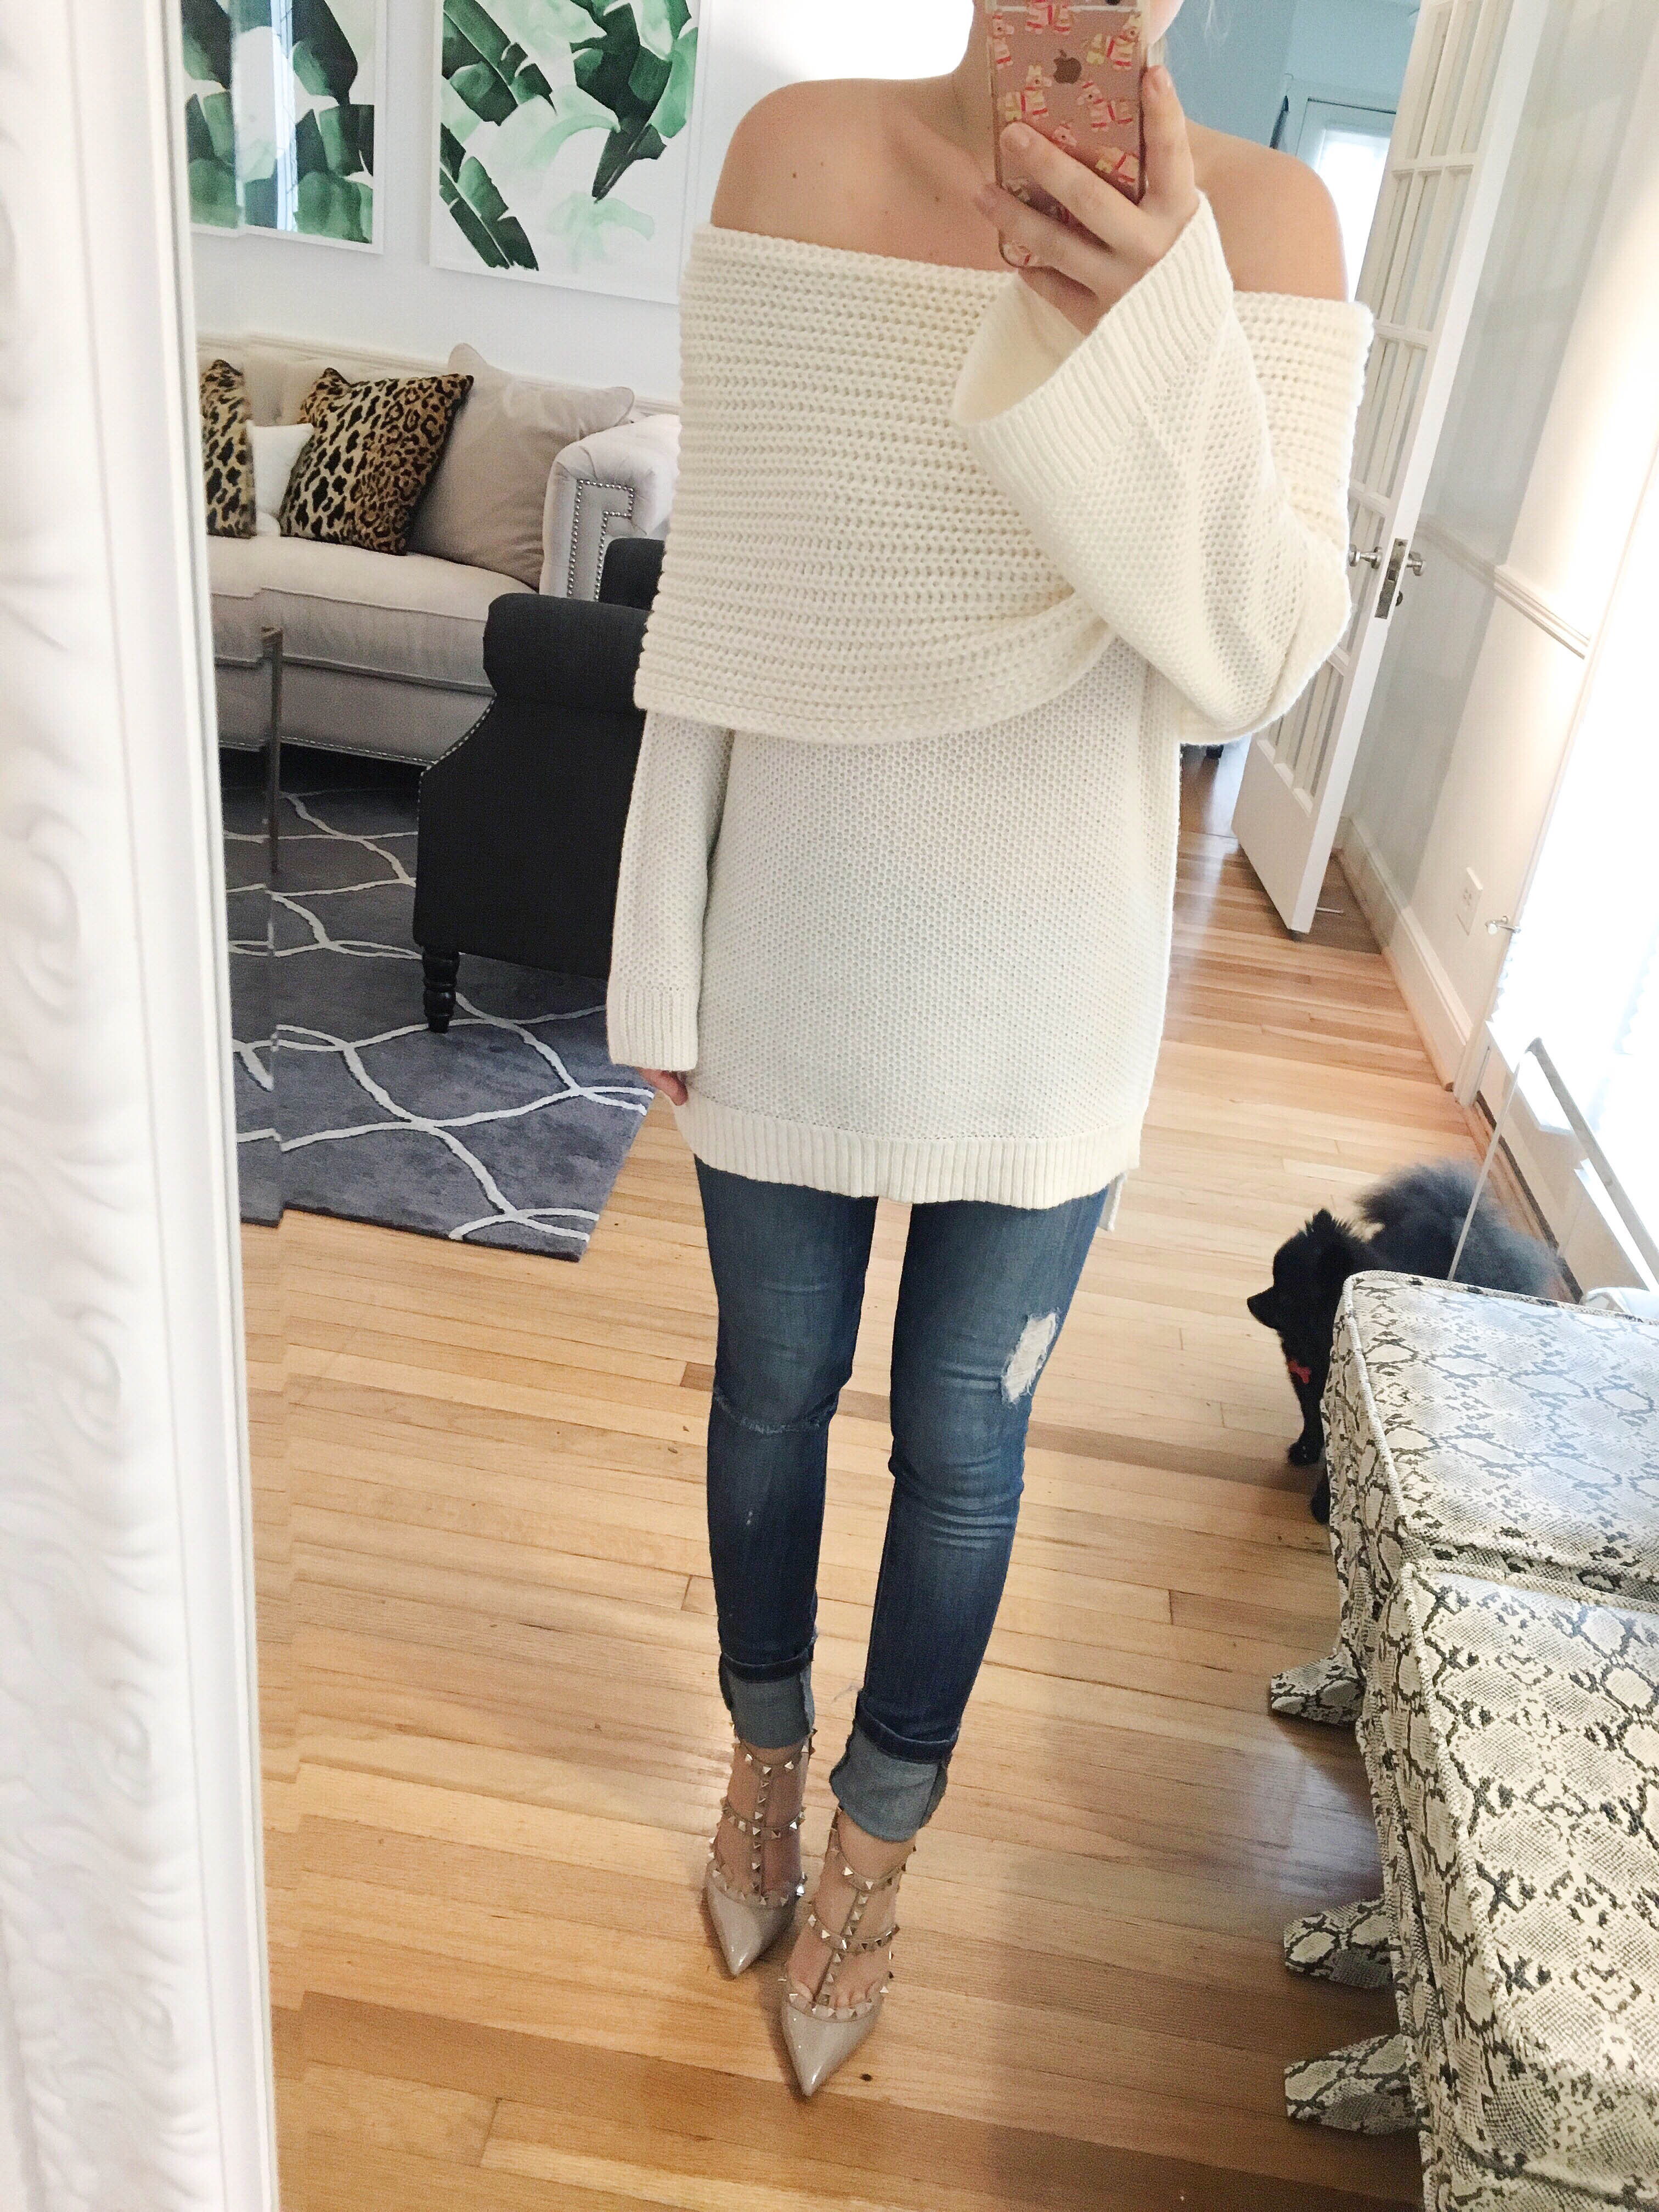 off-the-shoulder-sweater, nordstrom-sweater, nordstrom-jeans, under-$100-sweater, nordstrom-sweater, valentino-rockstuds, nude-valentino-rockstuds, jeans-under-$100, nordstrom-valentino-shoes